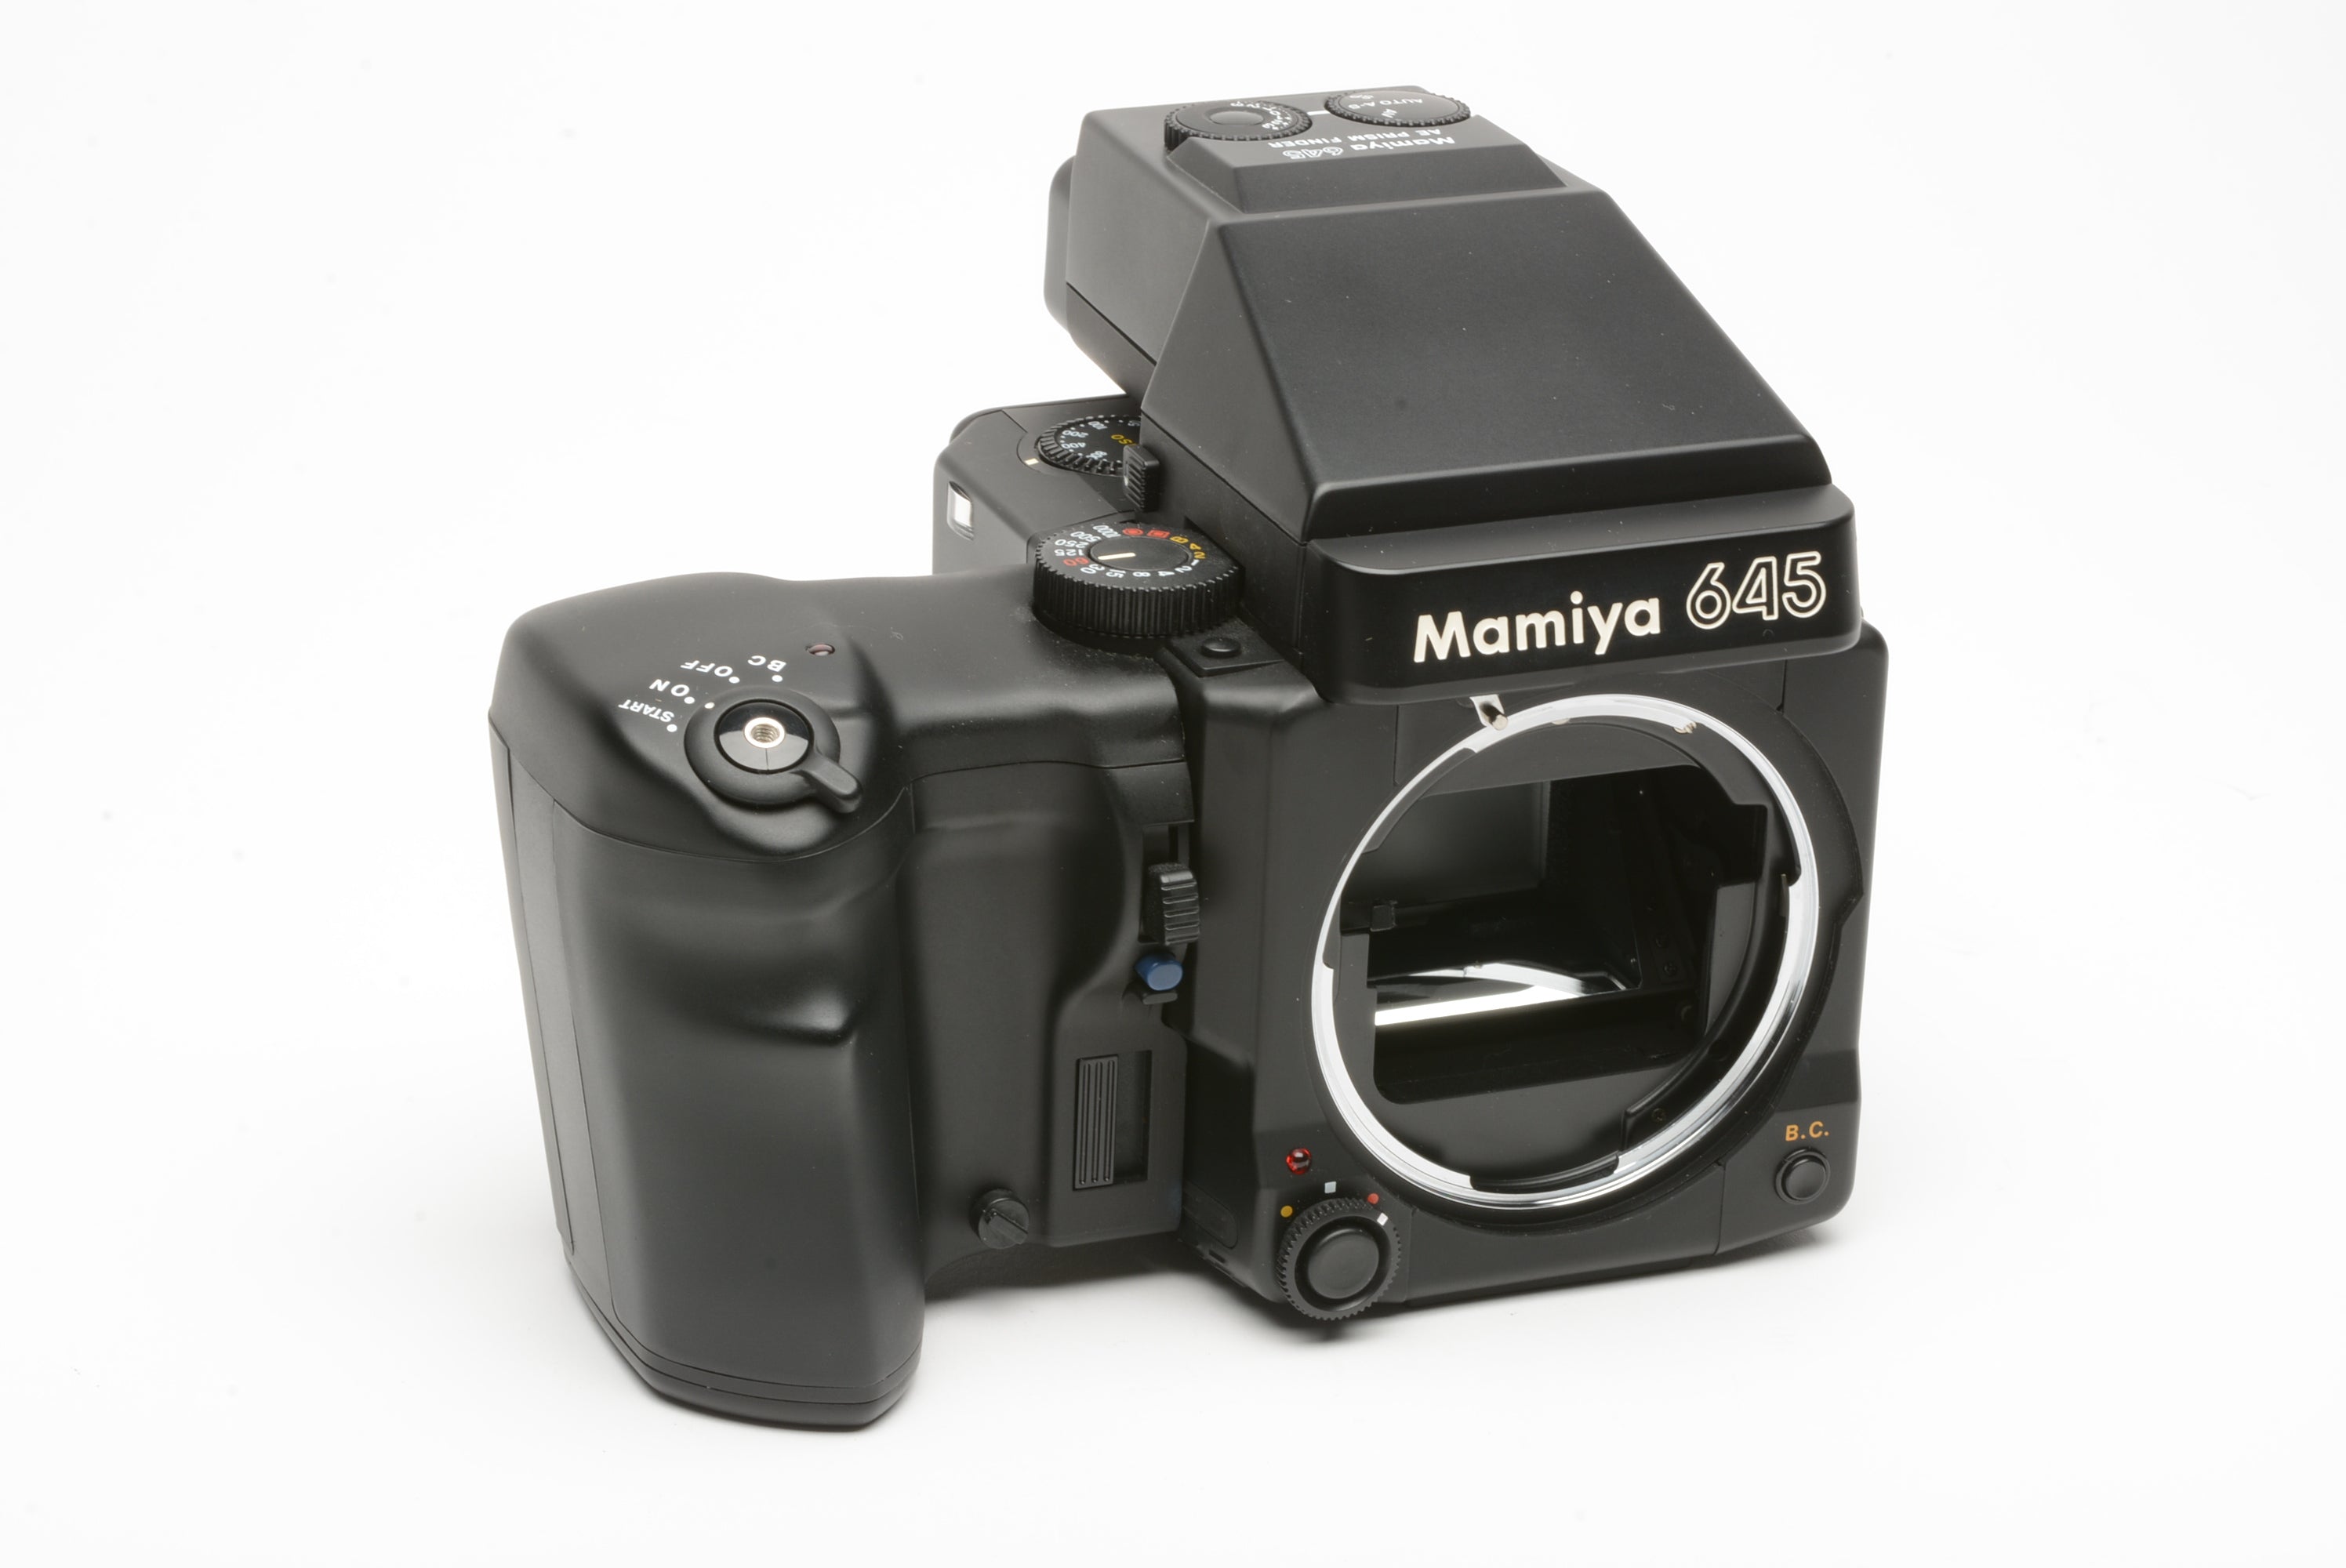 Mamiya 645 Super body, grip, AE prism finder and 120 back, tested 